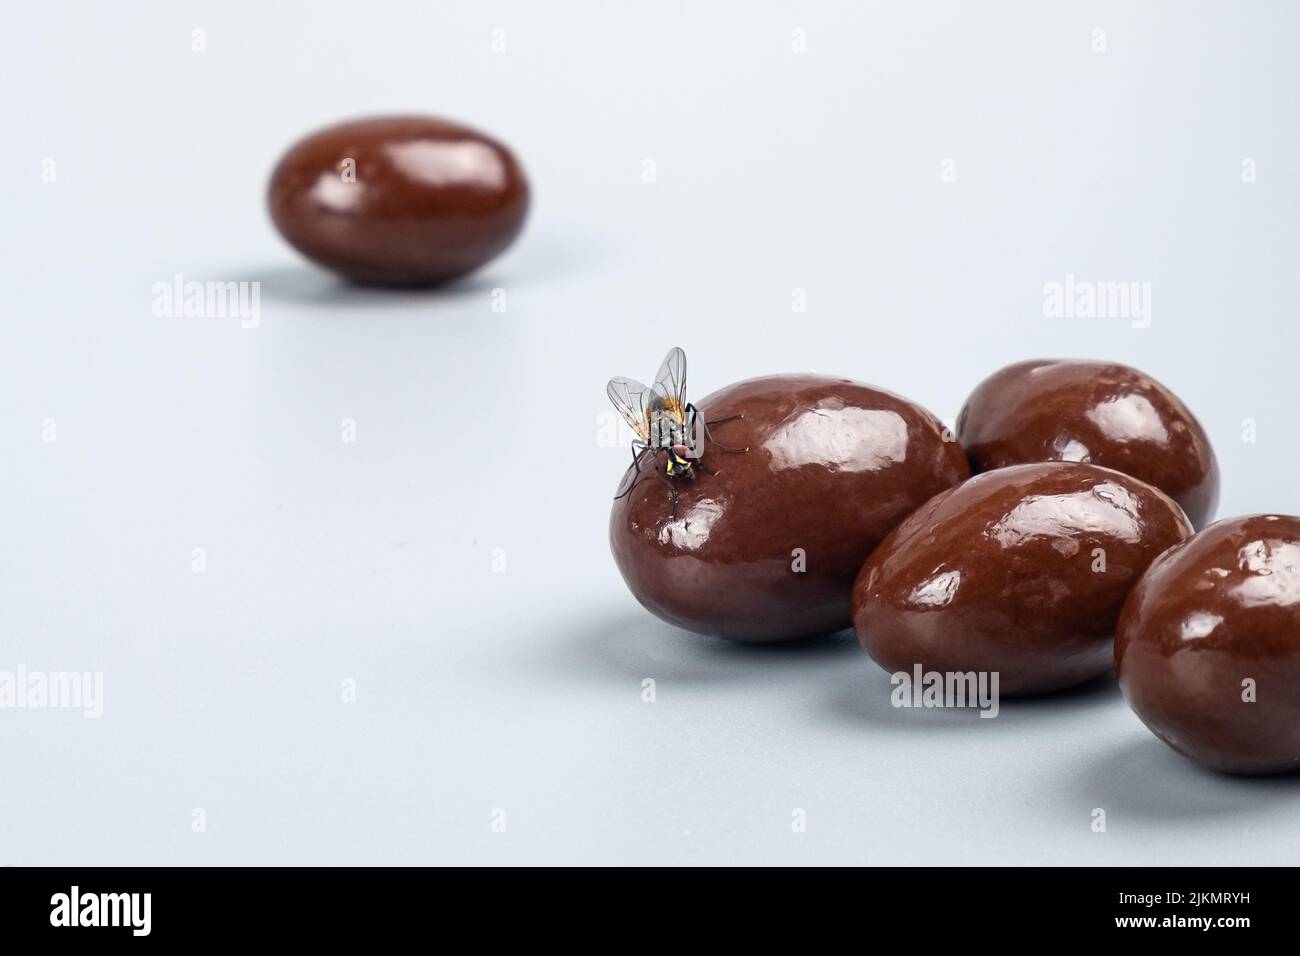 fly on candy, expired food sweets concept. Stock Photo